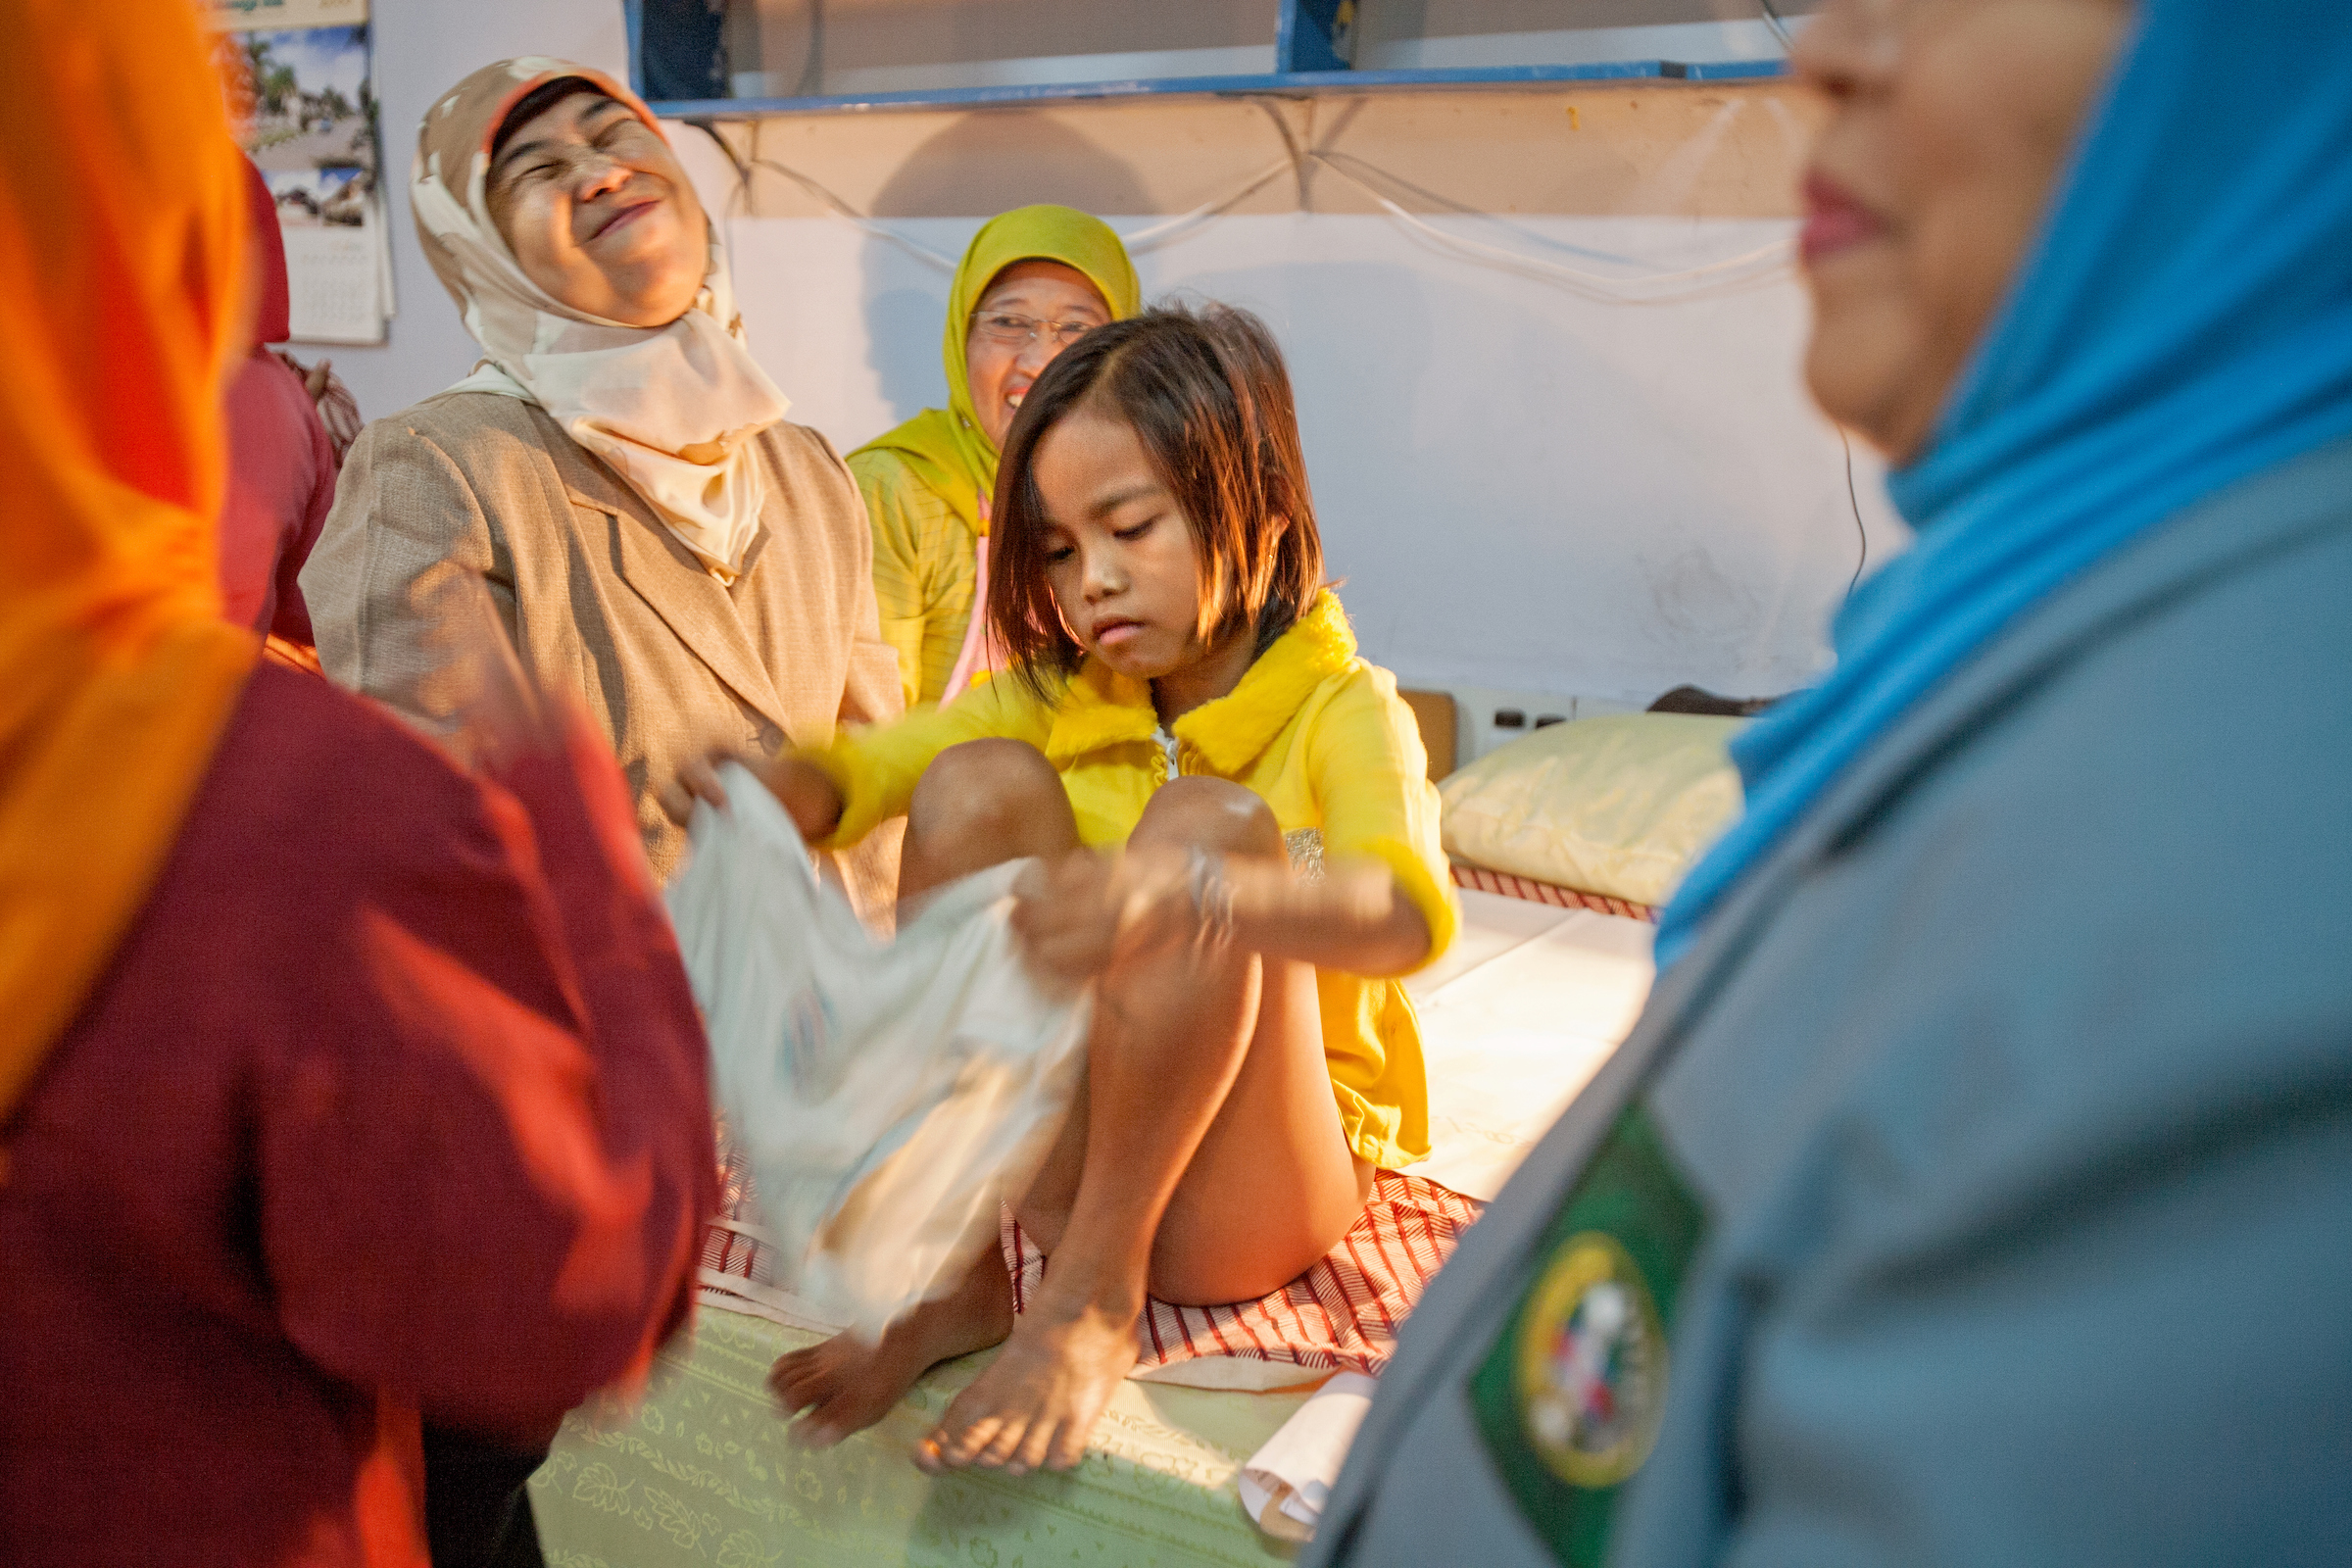 Surrounded by her circumcisers, a young girl is helped back into her underwear after the procedure in Bandung, Indonesia.